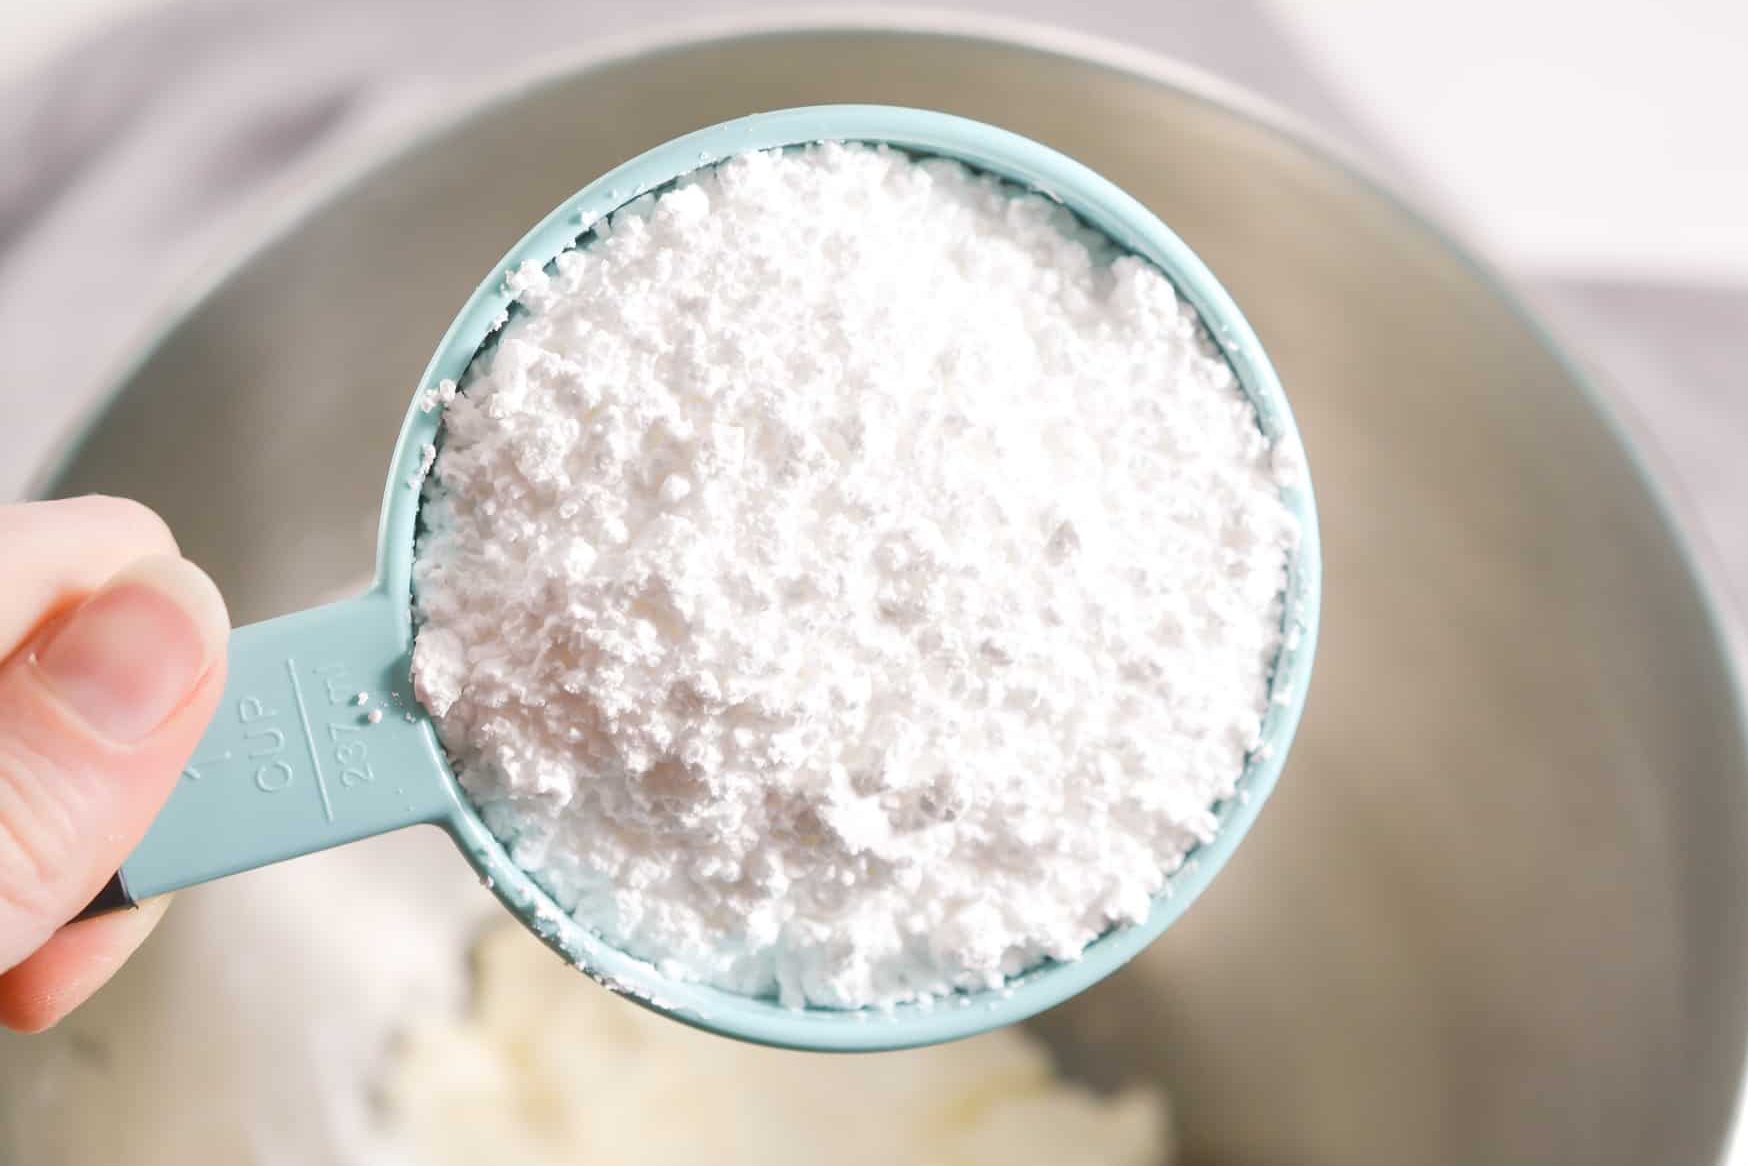 In a mixing bowl, beat together the cream cheese and powdered sugar until smooth.